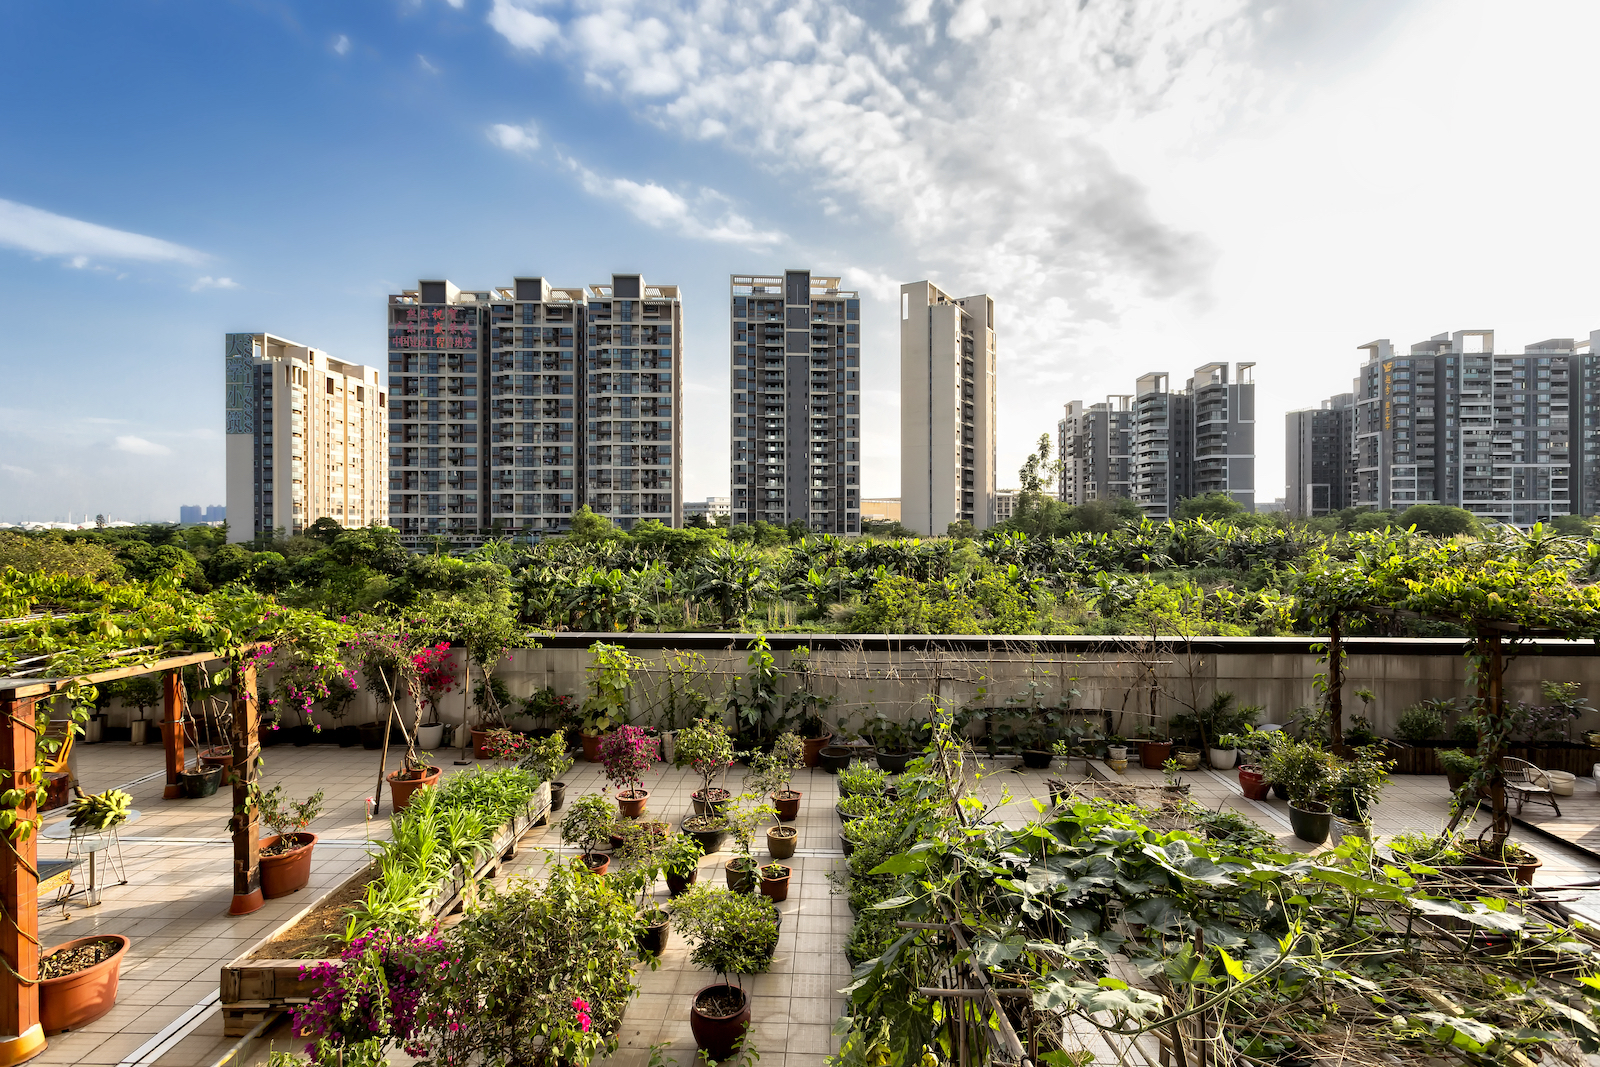 An urban garden with high-rise apartment buildings in the background